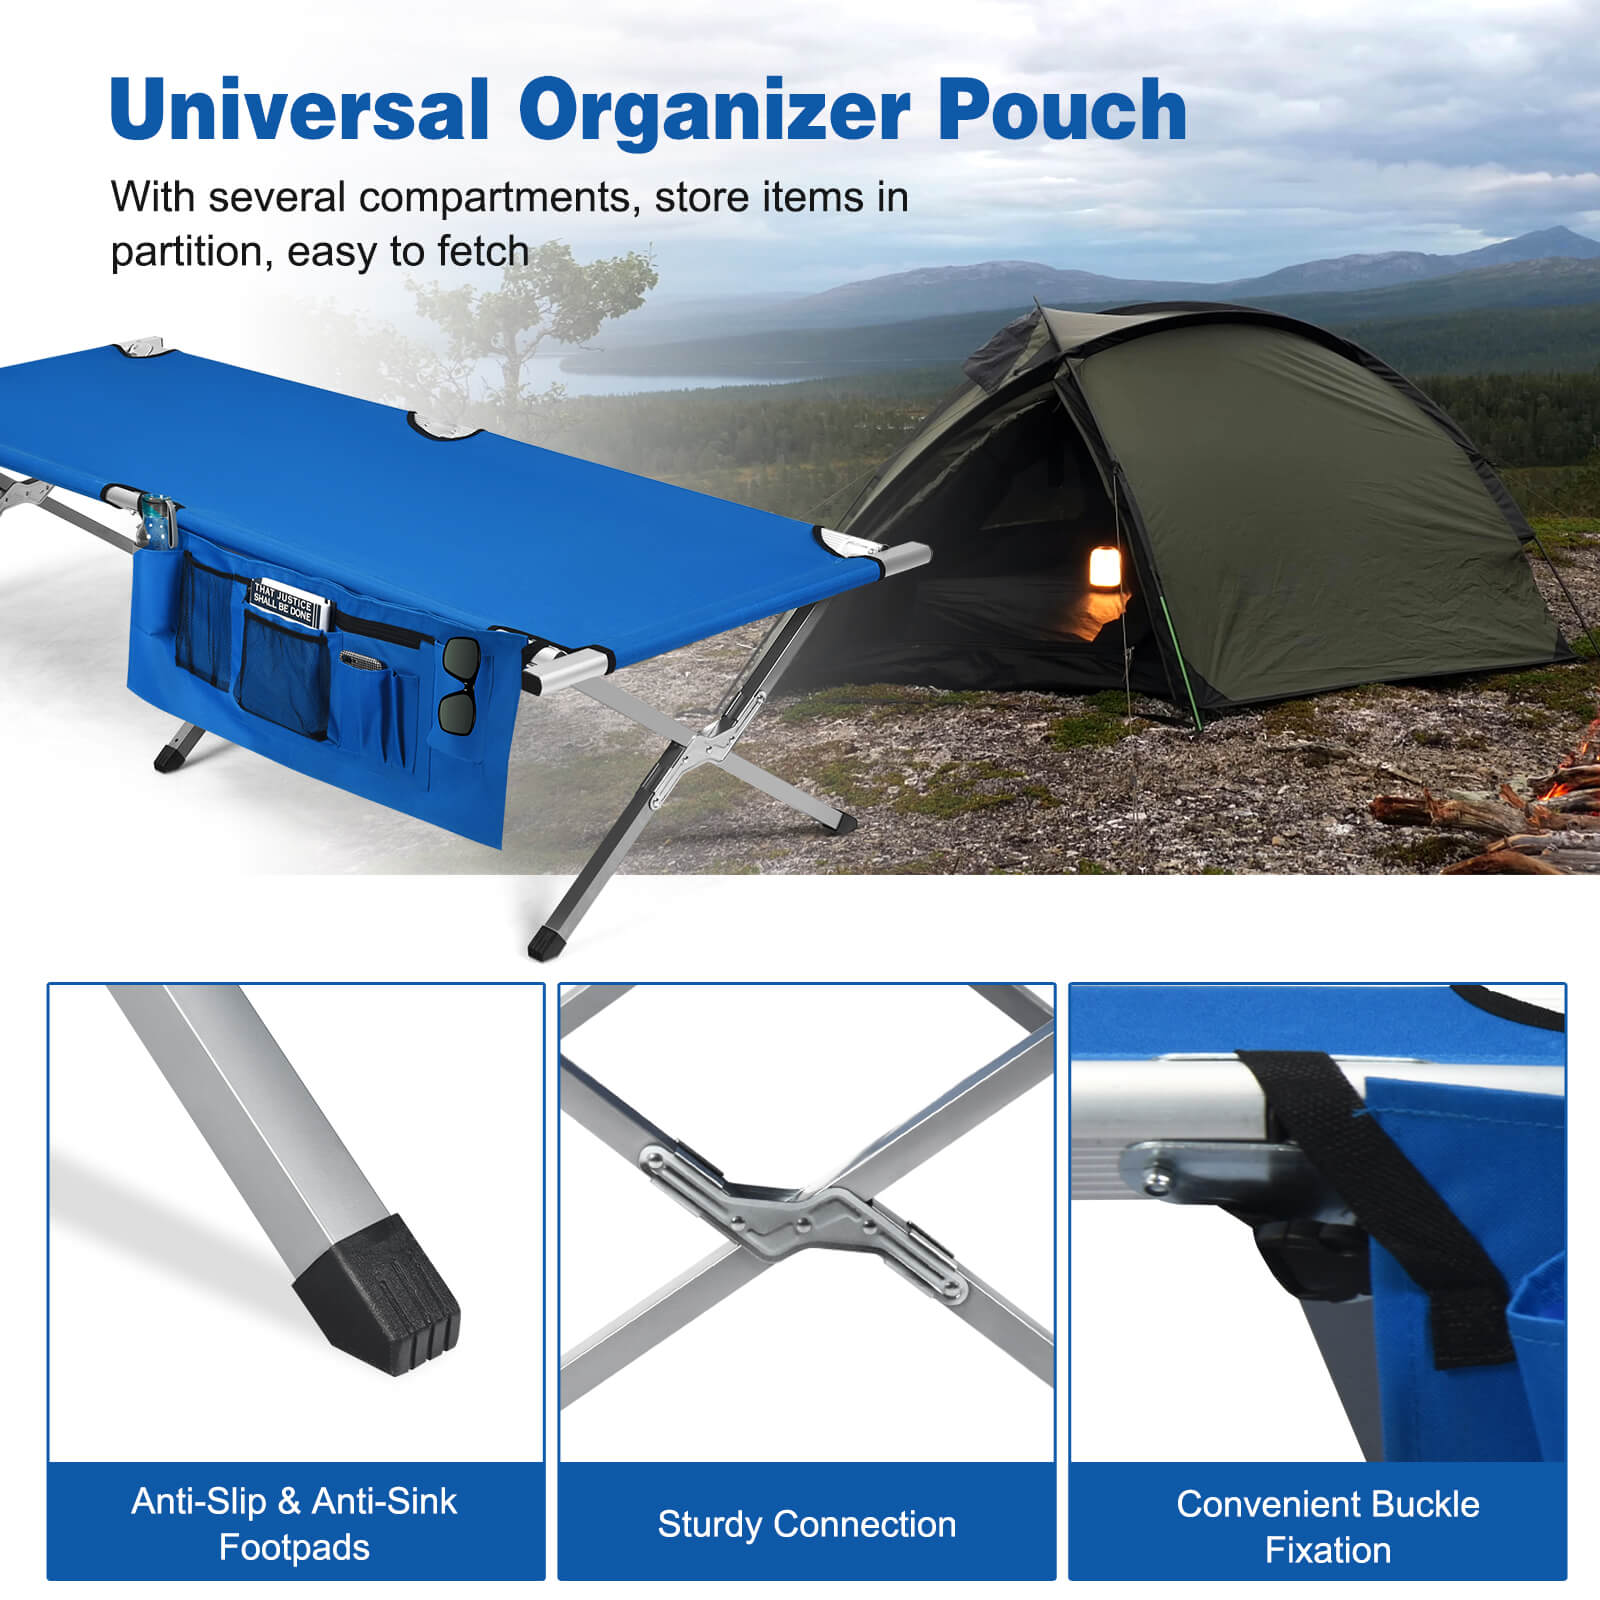 Folding_Camping_Bed_Outdoor_Sleeping_Cot_with_Carry_Bag_for_Beach_Blue-9.jpg